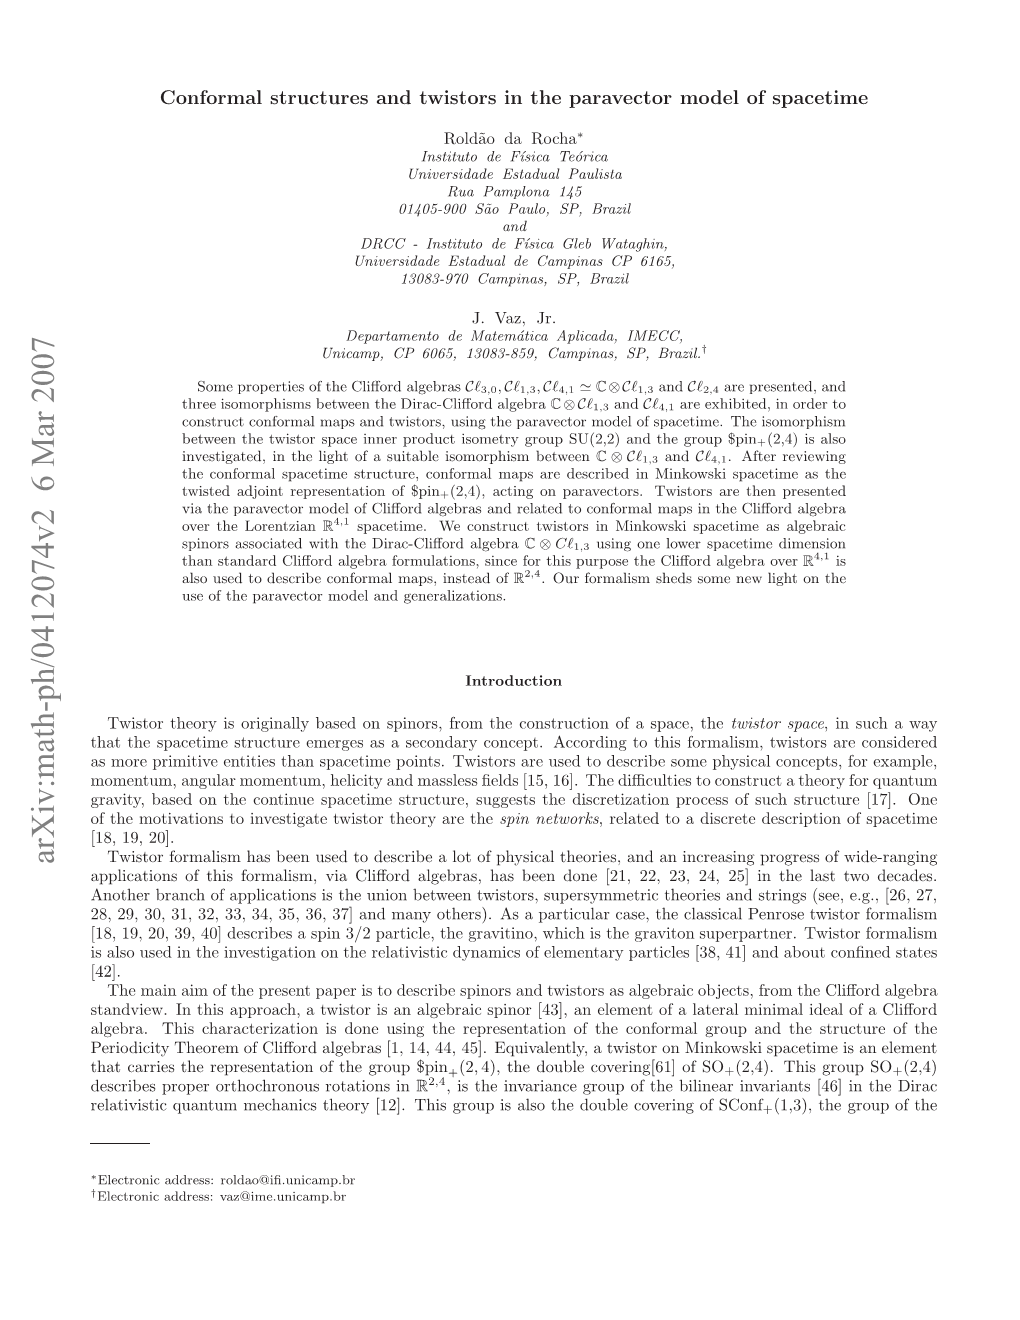 Conformal Structures and Twistors in the Paravector Model of Spacetime